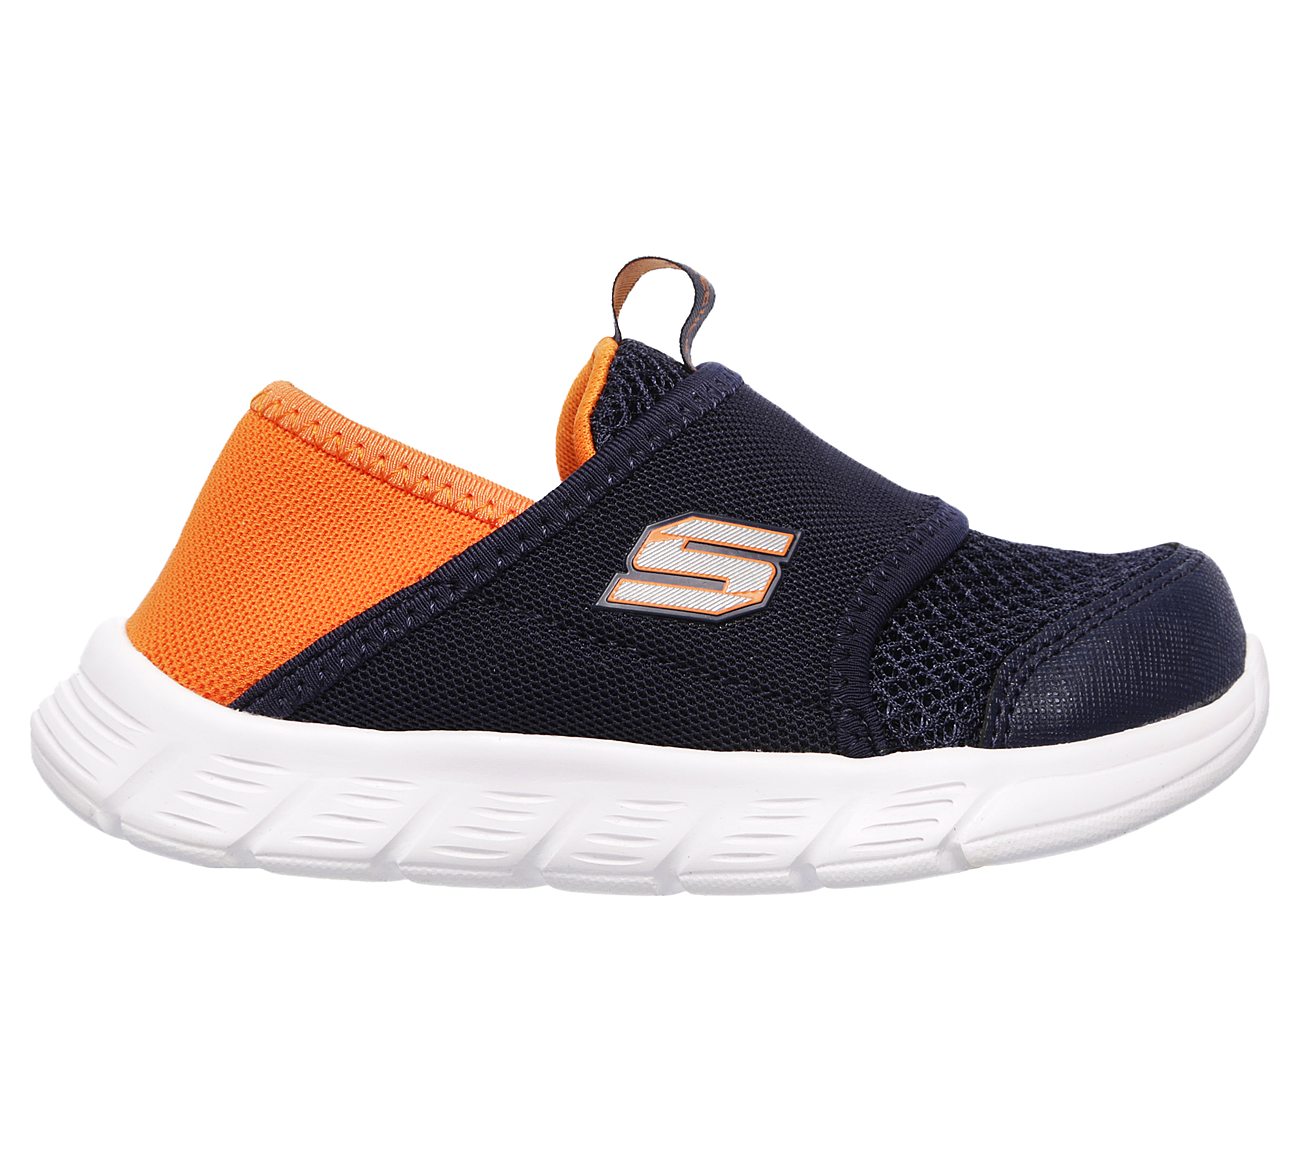 skechers toddler shoes